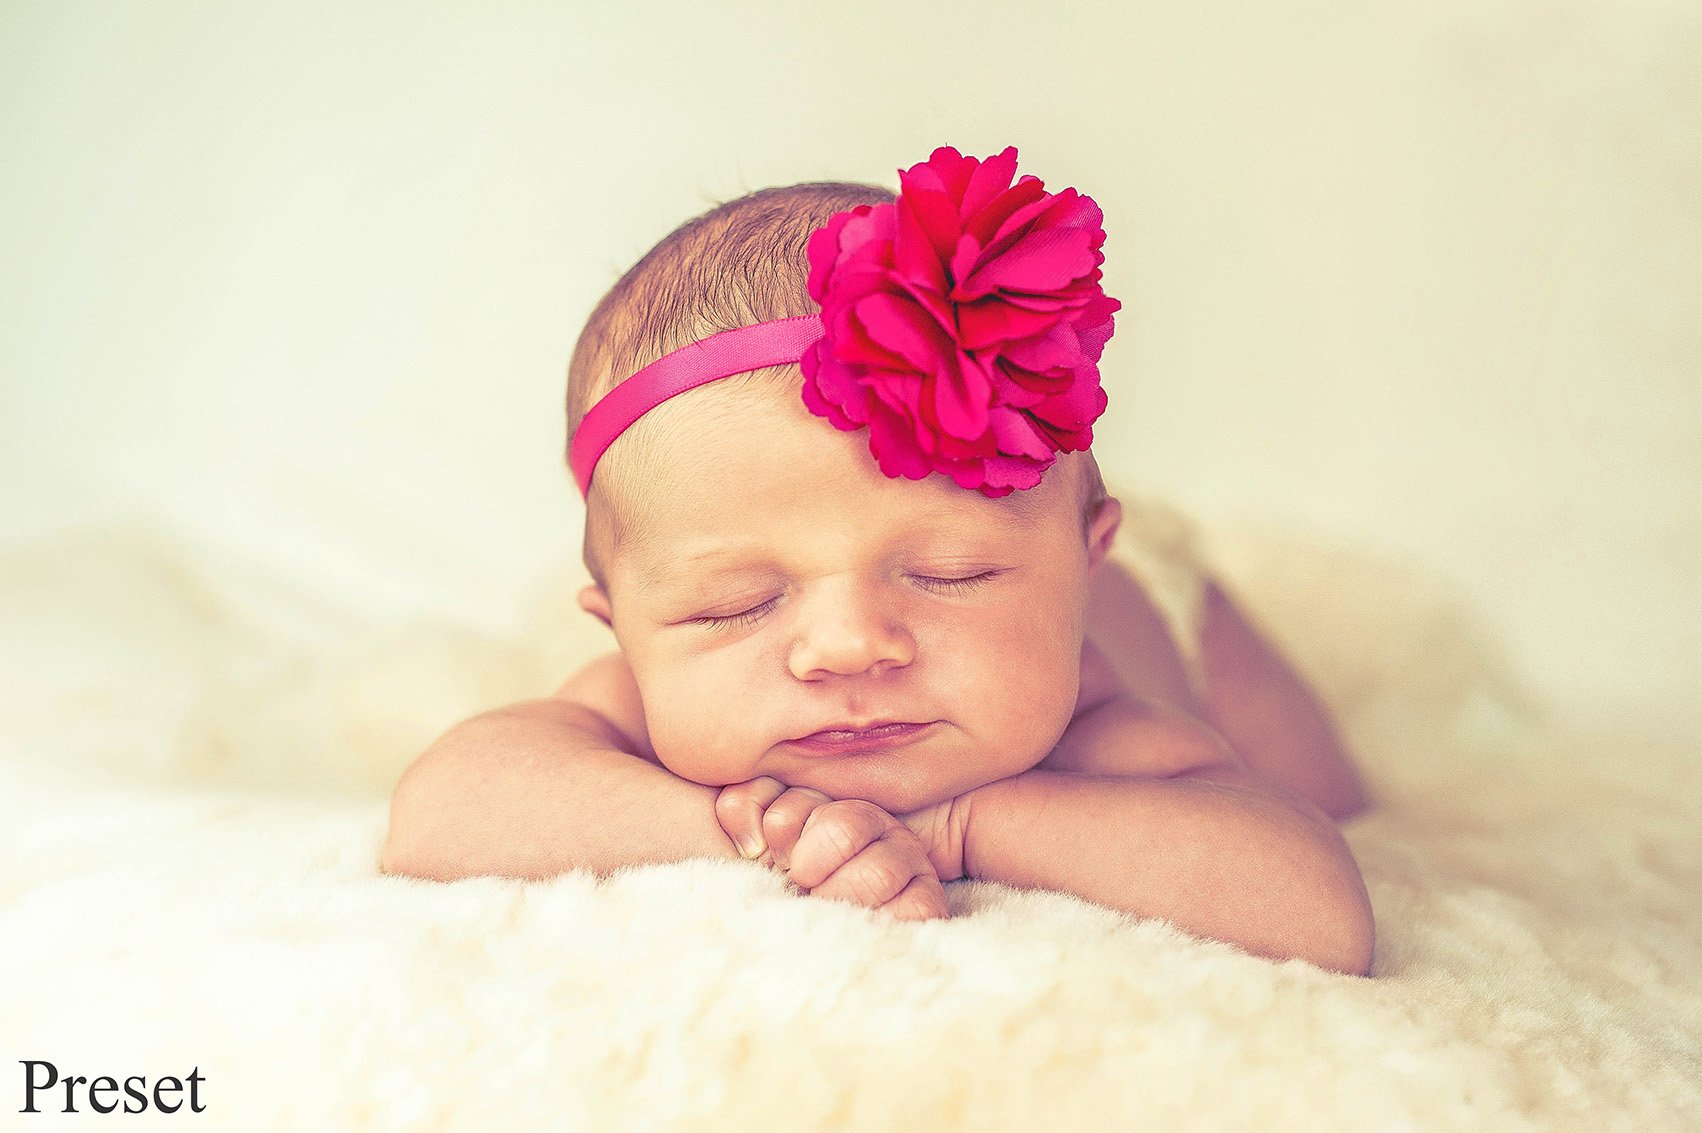 50 Baby Presets for Lightroomcover image.